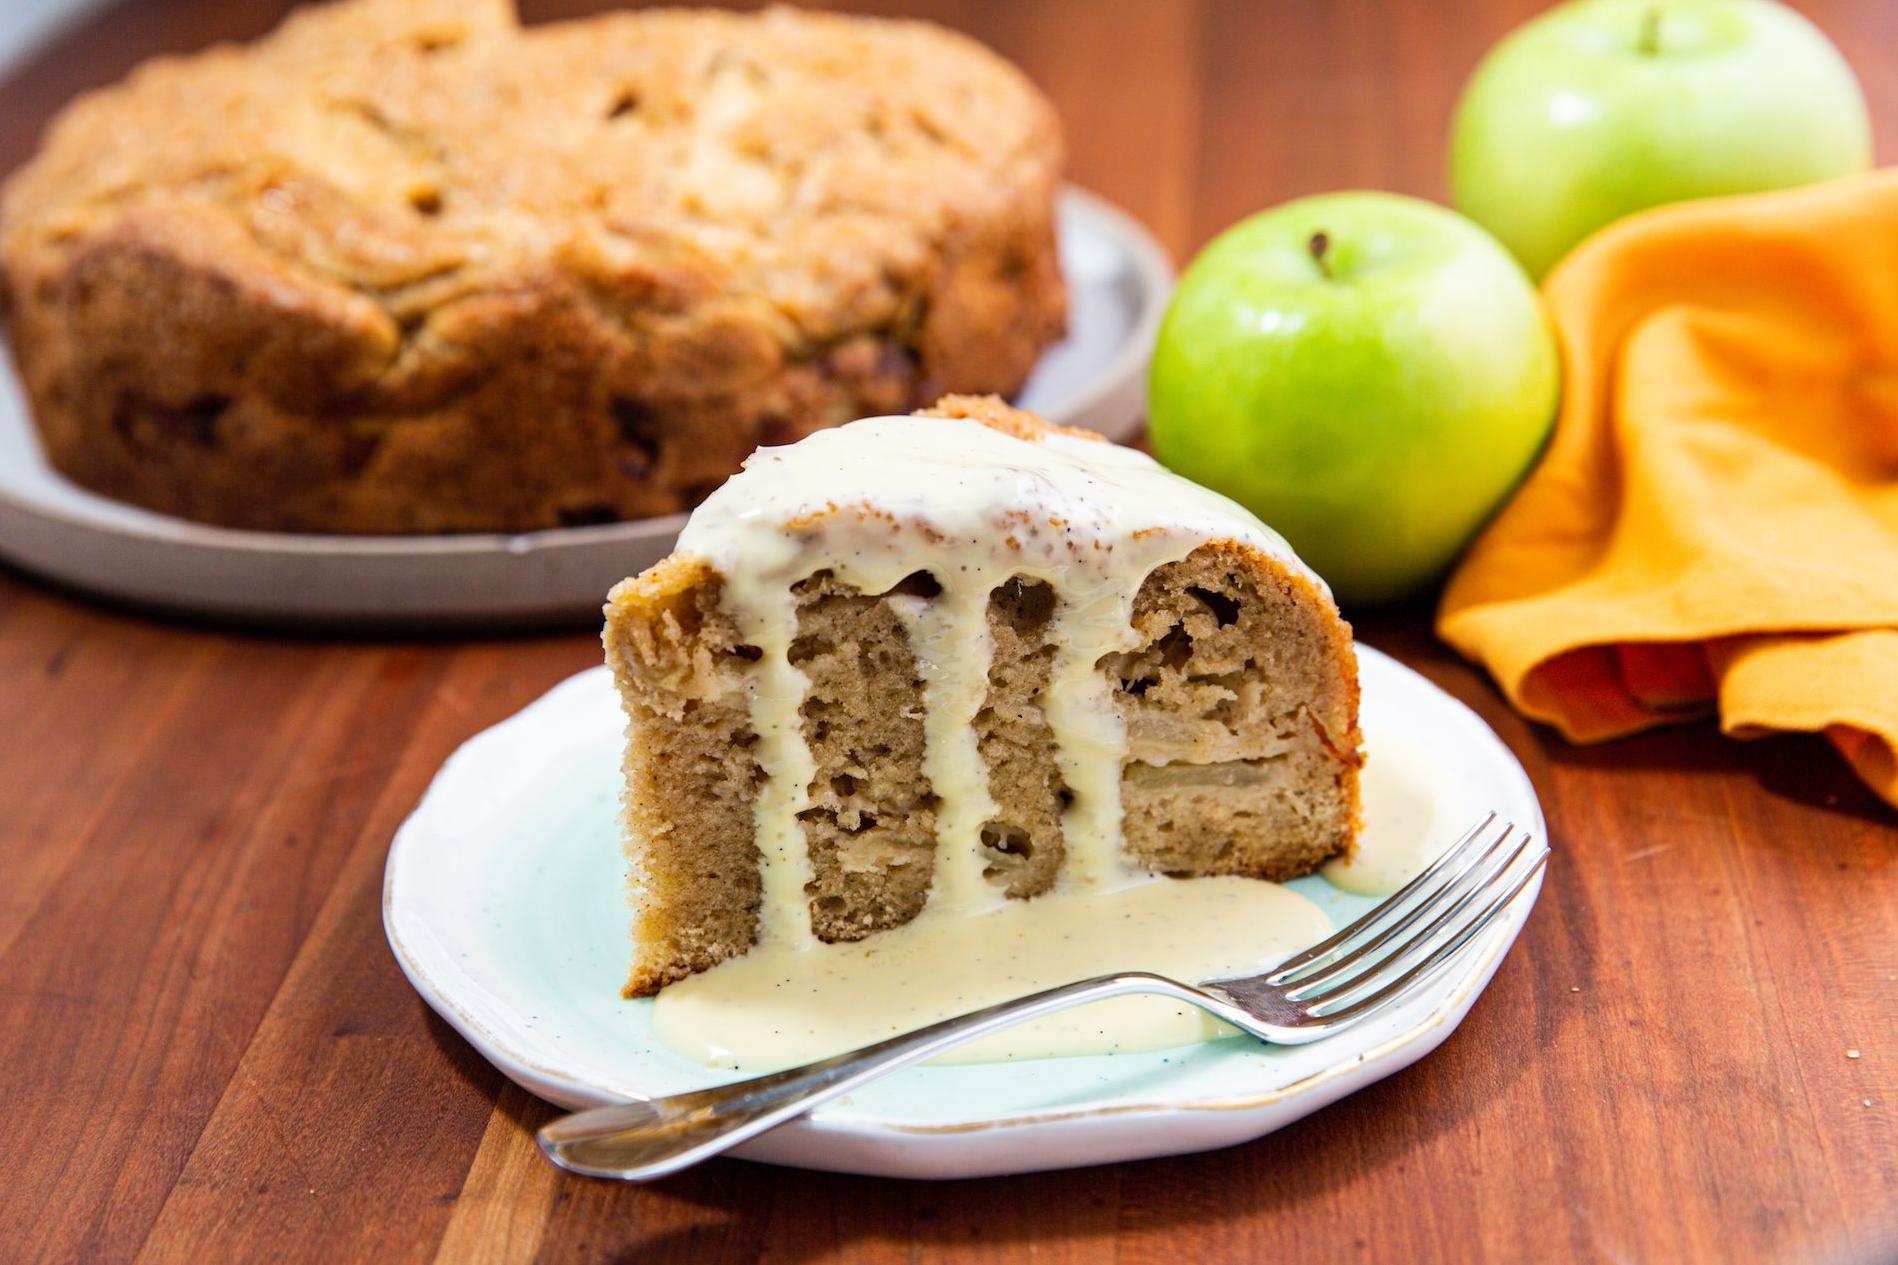  A sweet aroma of cinnamon and apples is guaranteed to fill your kitchen when baking this cake